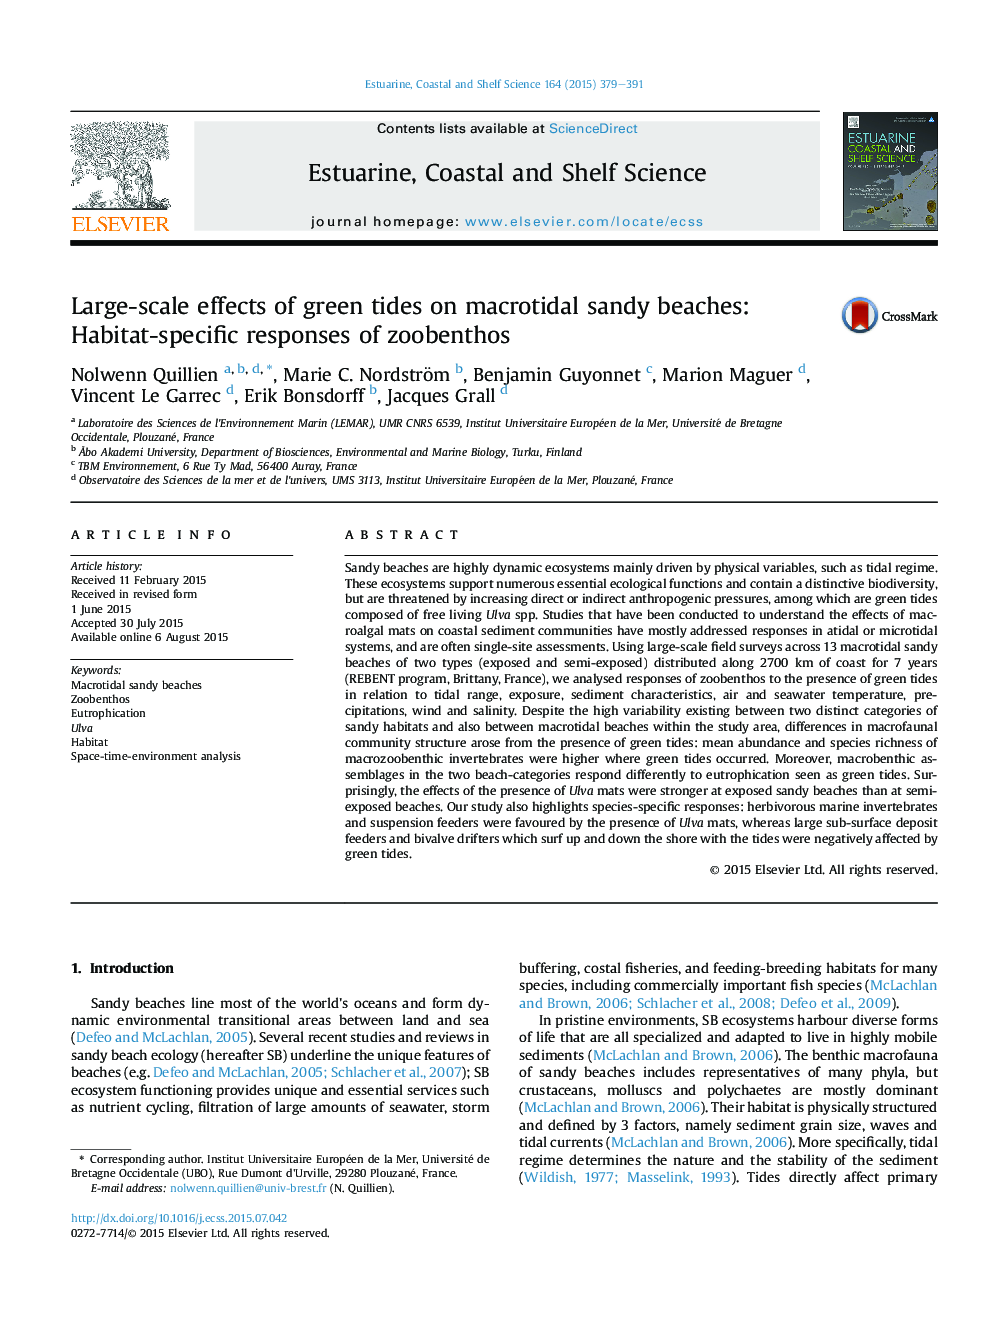 Large-scale effects of green tides on macrotidal sandy beaches: Habitat-specific responses of zoobenthos